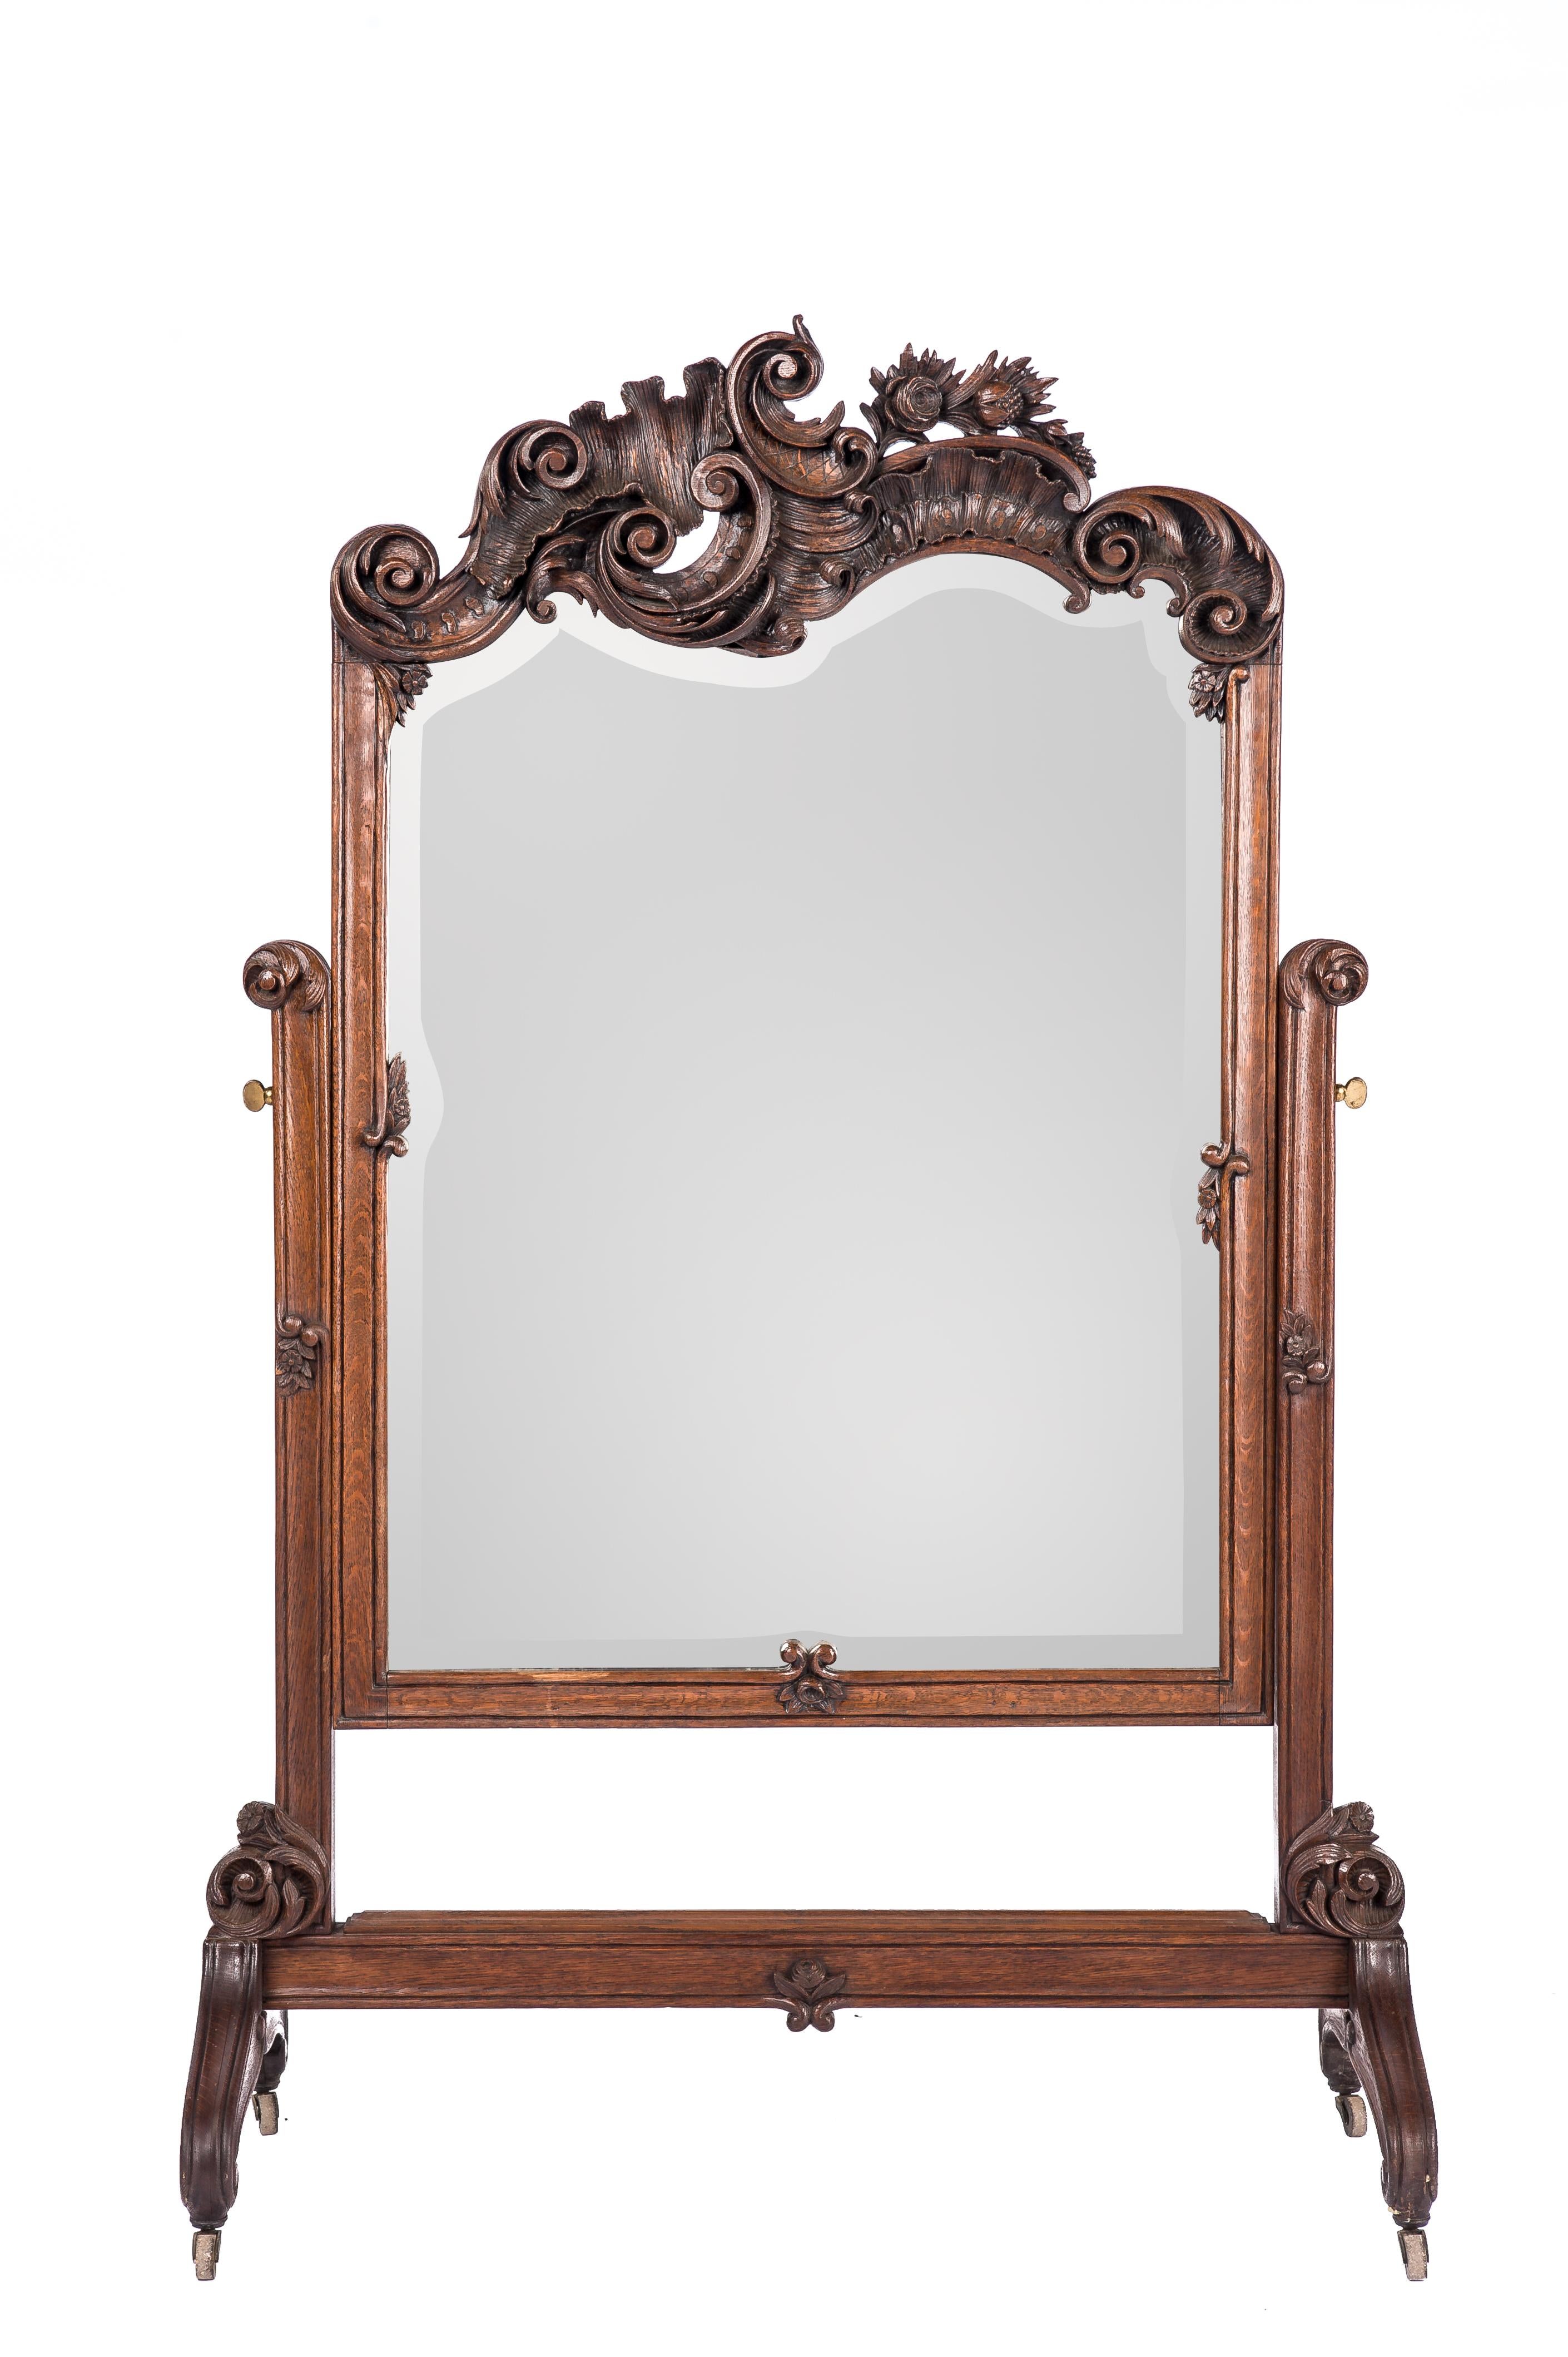 This beautiful hand-carved floor mirror was made in Belgium in the late 1800s. The mirror is a fine example of the highly detailed carved oak ornaments that the Belgian region of Liege is known for. The mirror was carved in the asymmetrical Louis